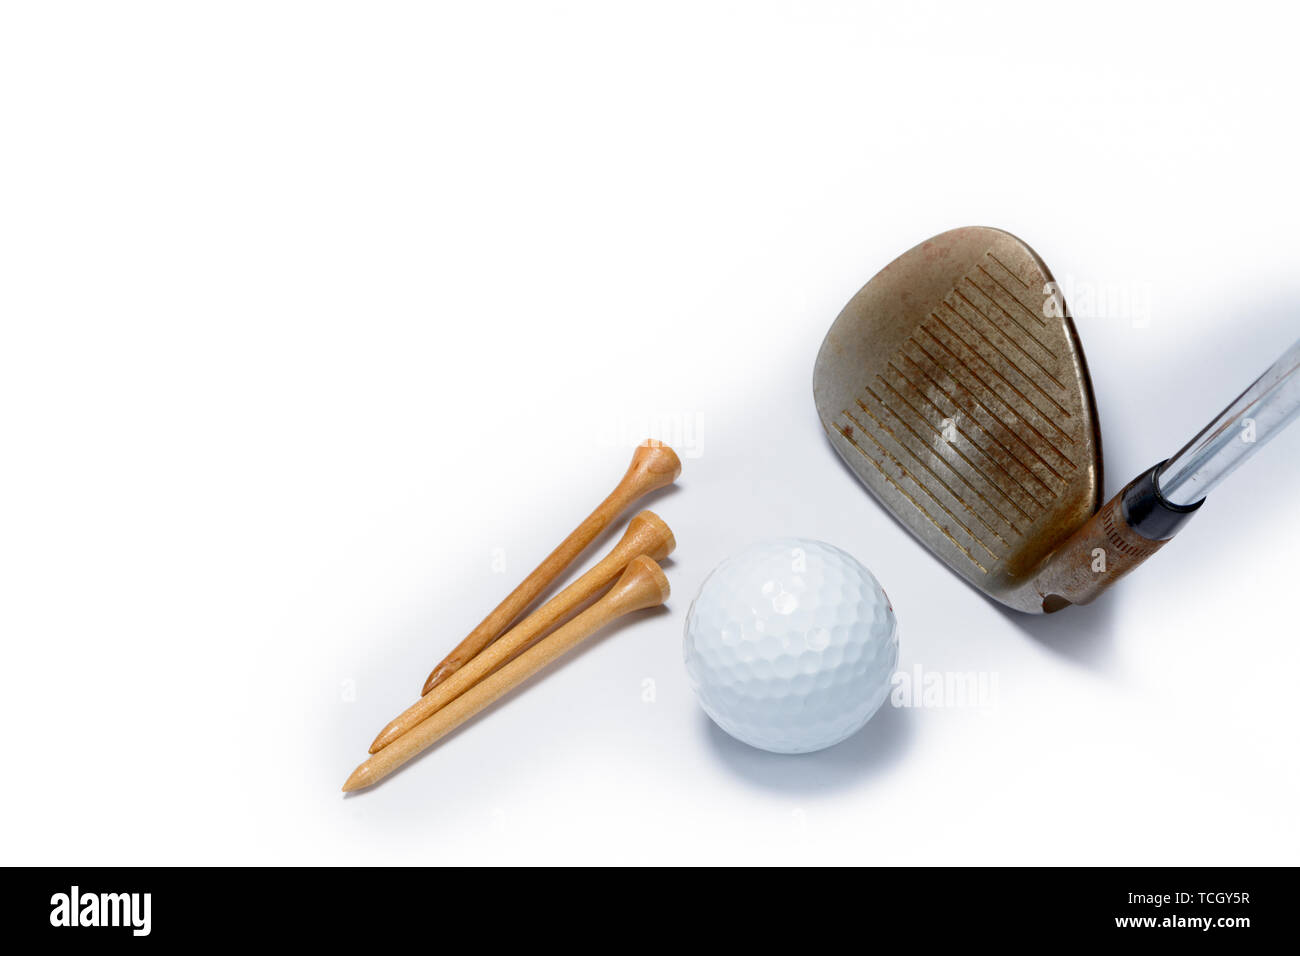 various golf equiptment on a white background. A golf ball, golf club sand wedge, and golf tees. Stock Photo